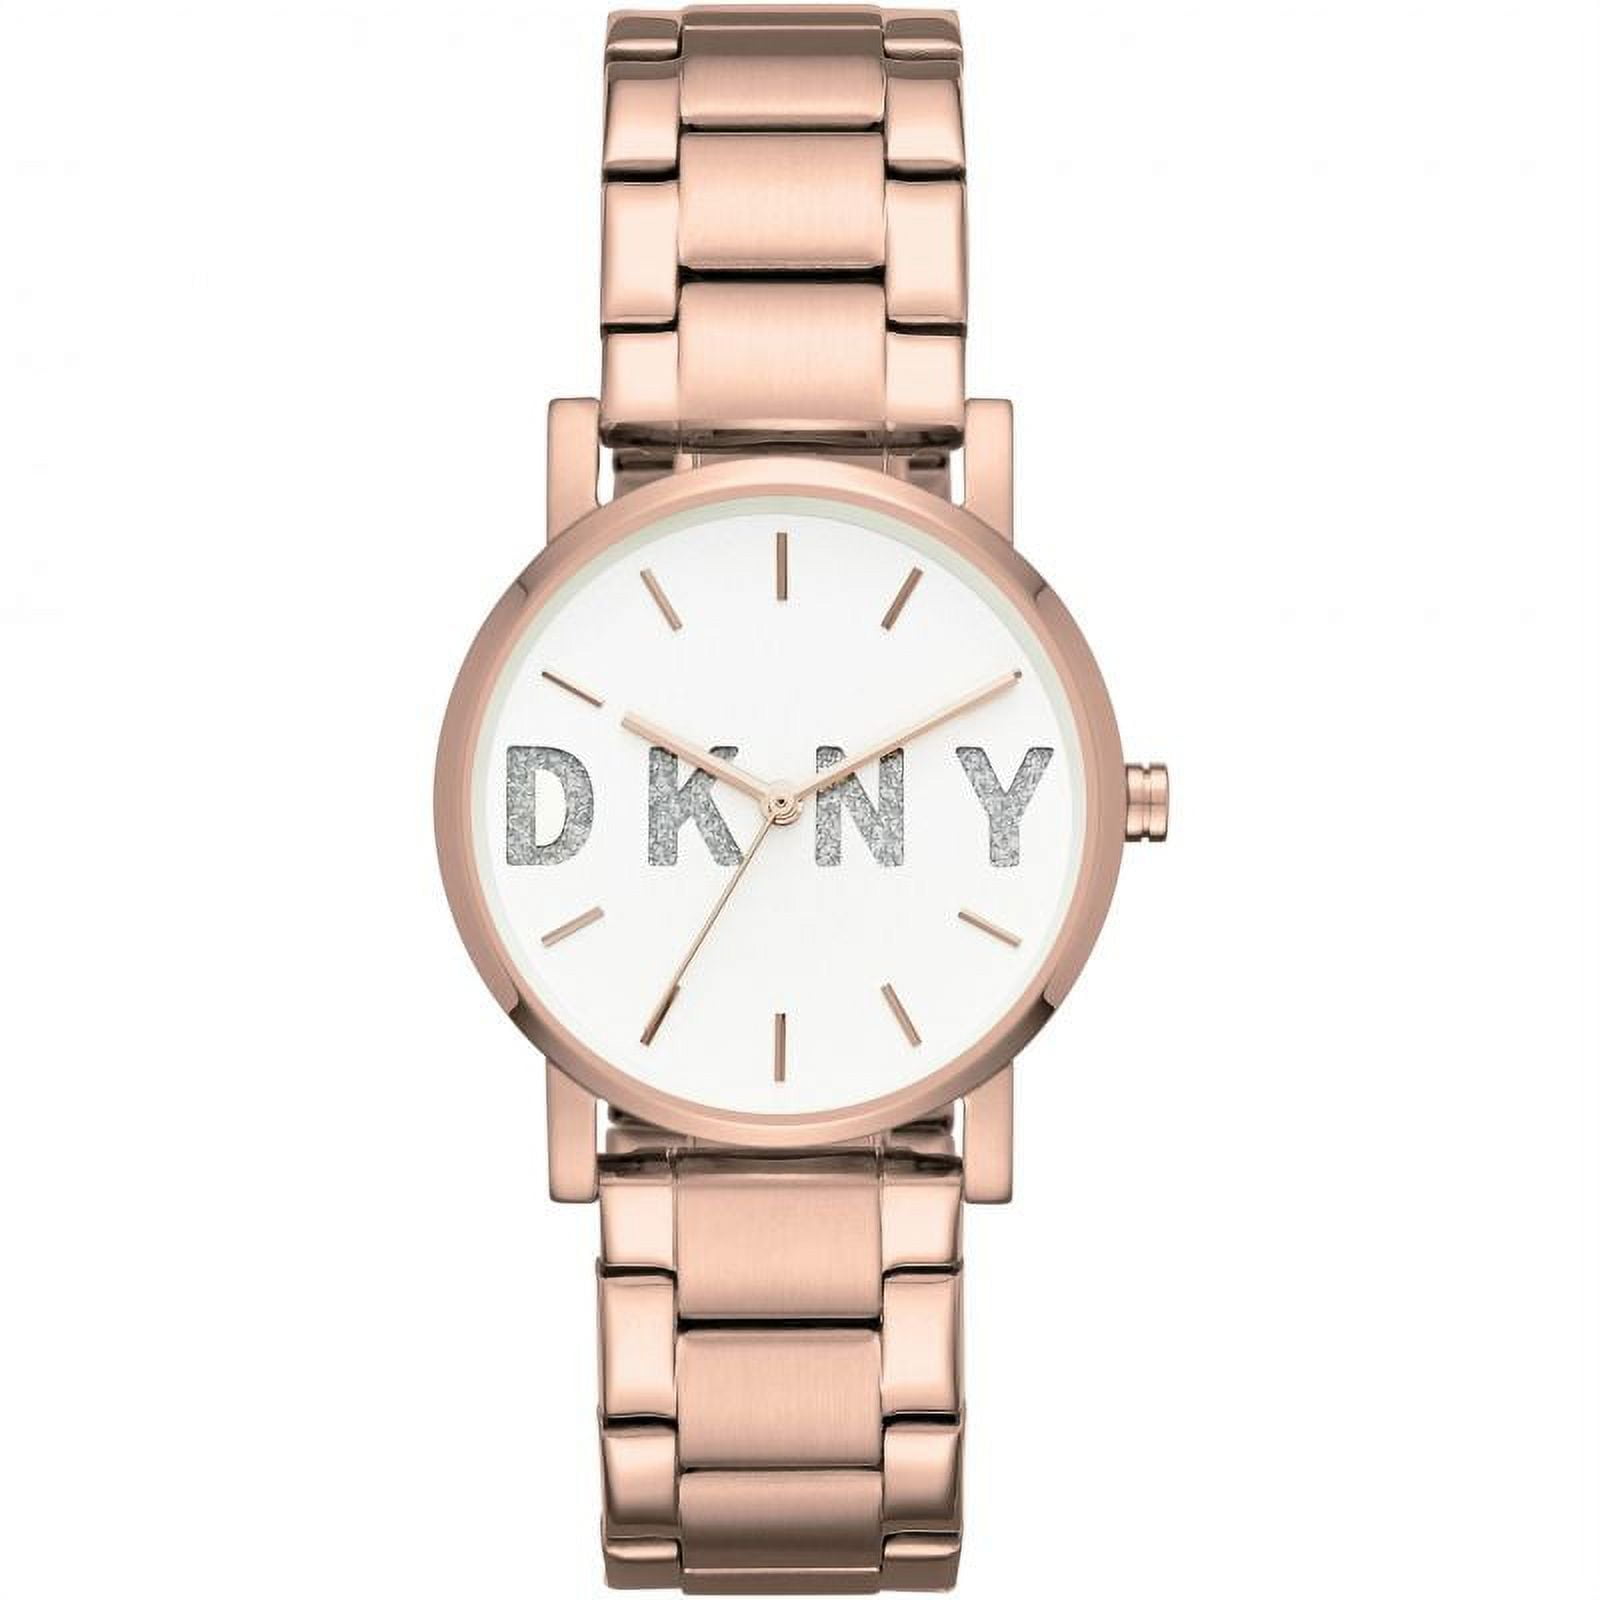 DKNY Women's NY4661 Crystal Accented Stainless Steel Watch | Fashion watches,  Trendy watches, Women's dress watches